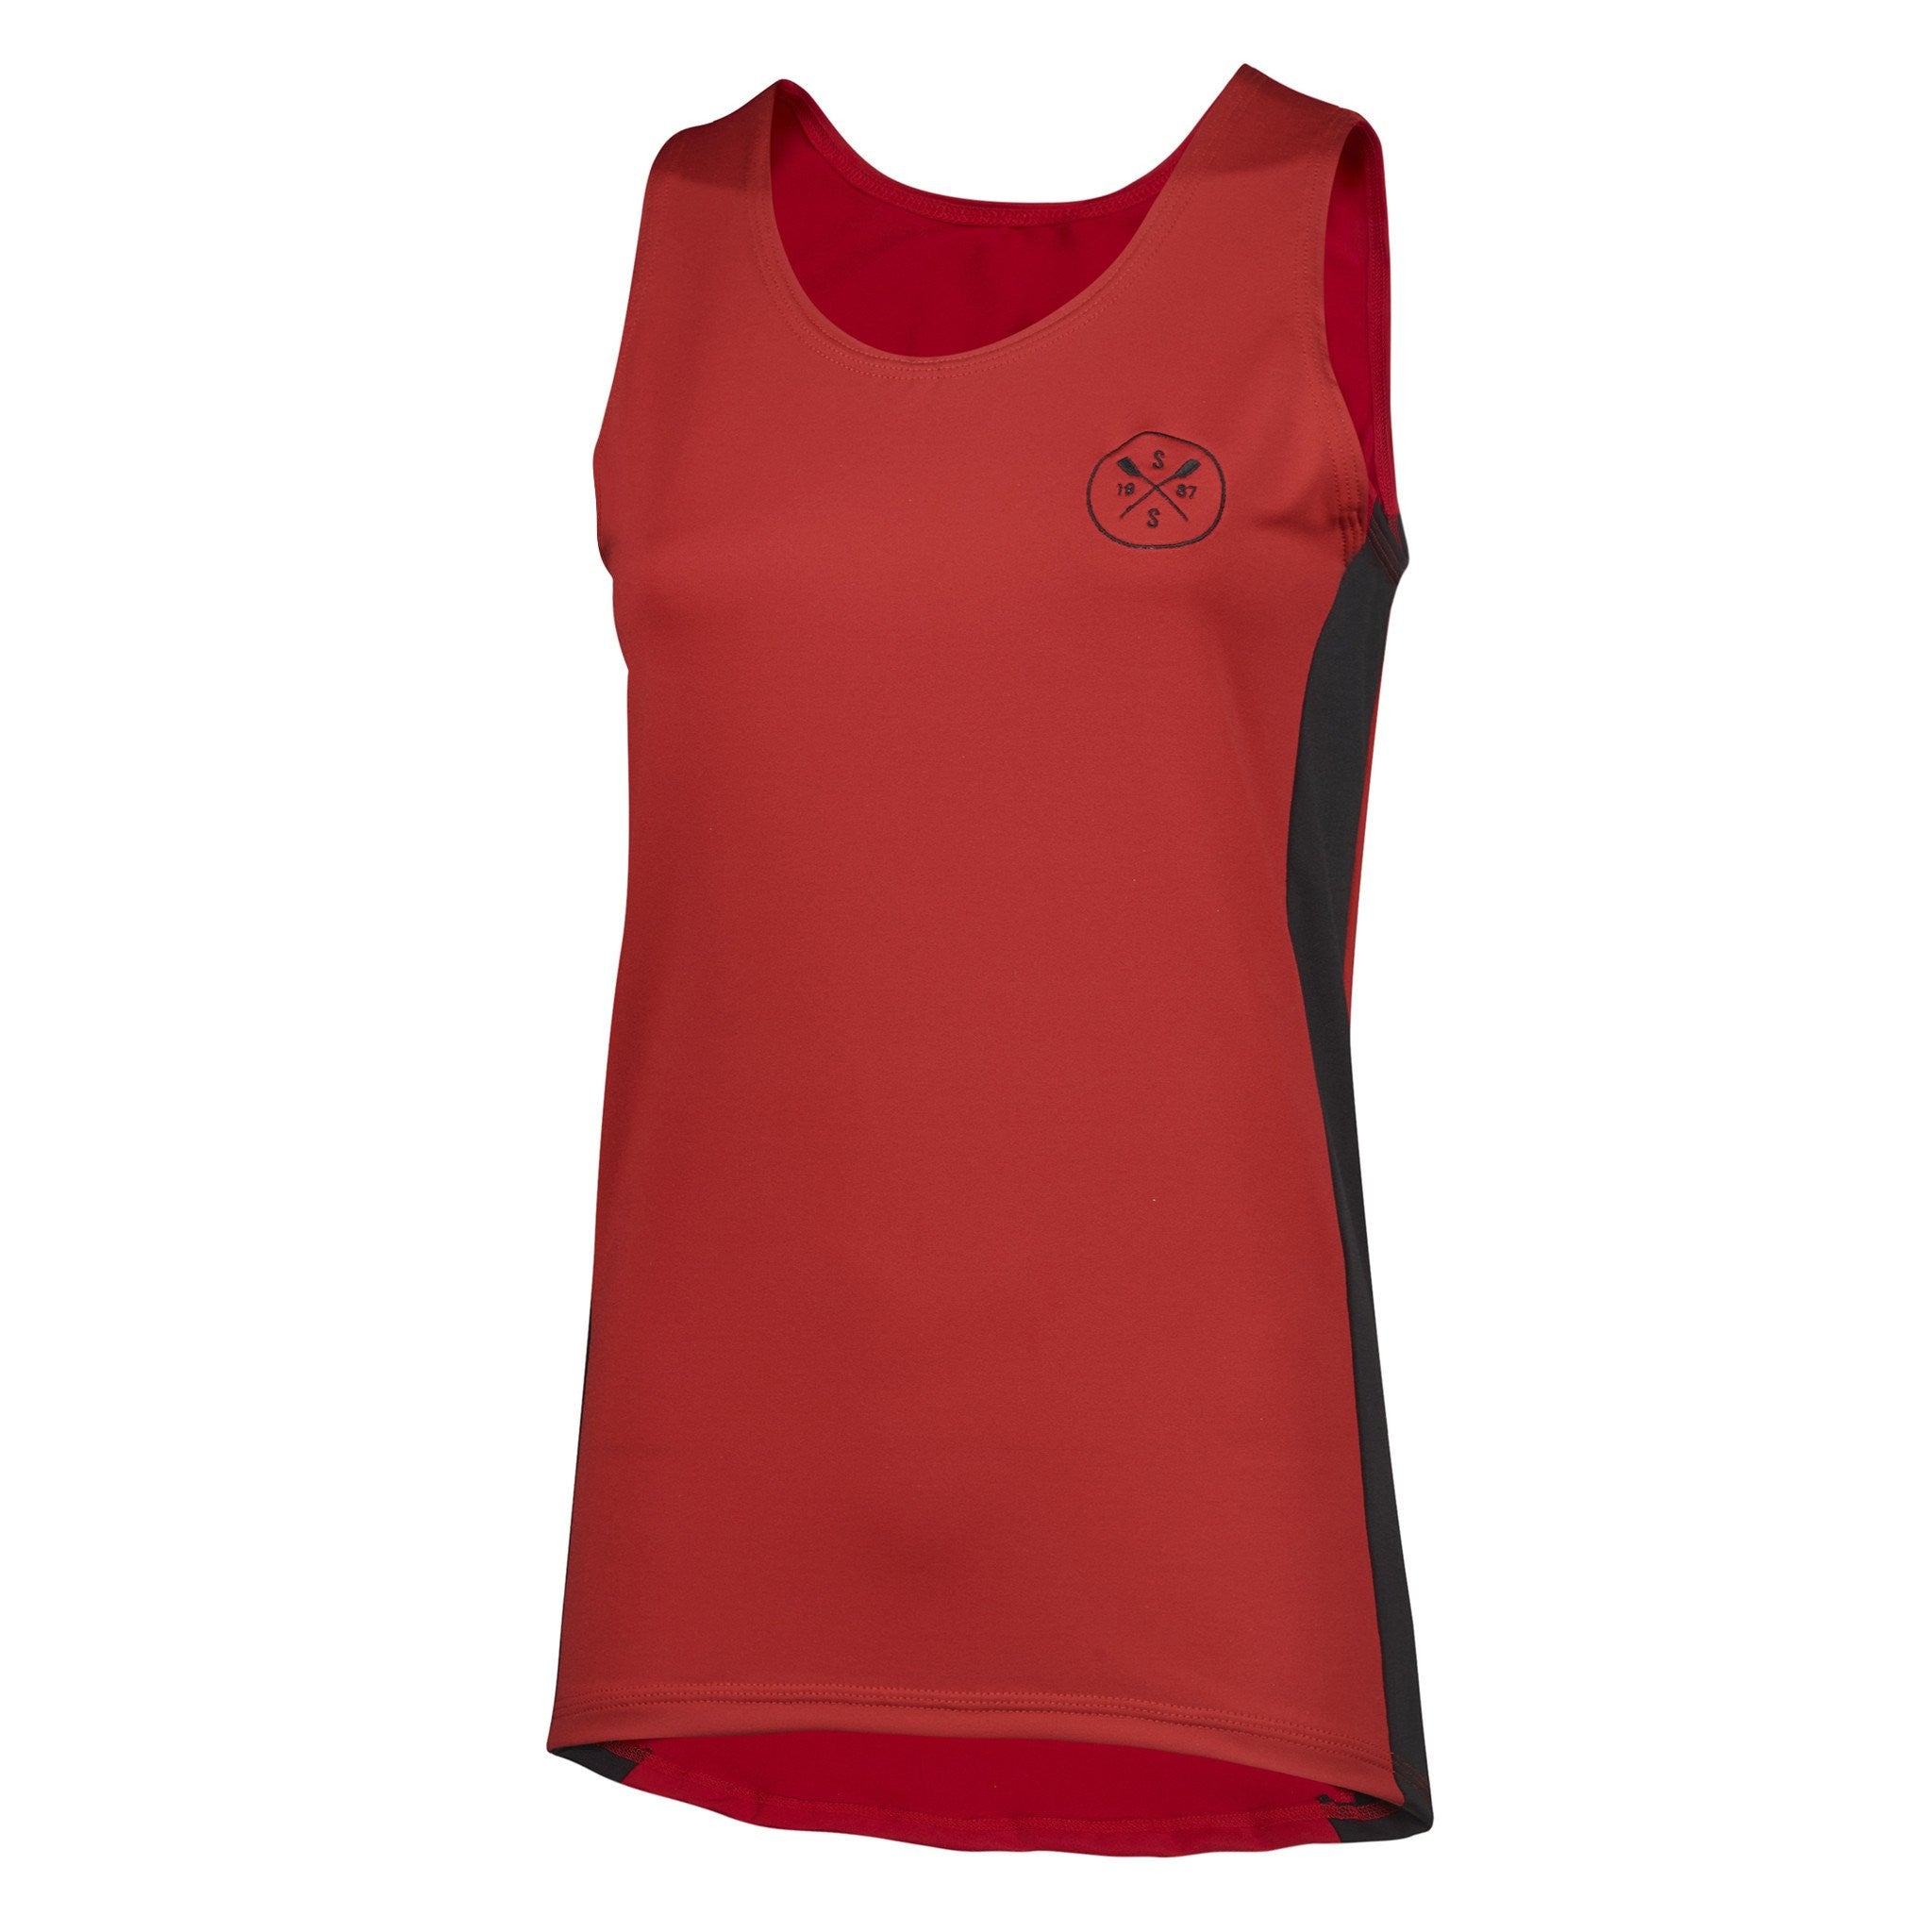 Sew Sporty Fitted Tech Tank - Dryflex Poly Spandex (Red)